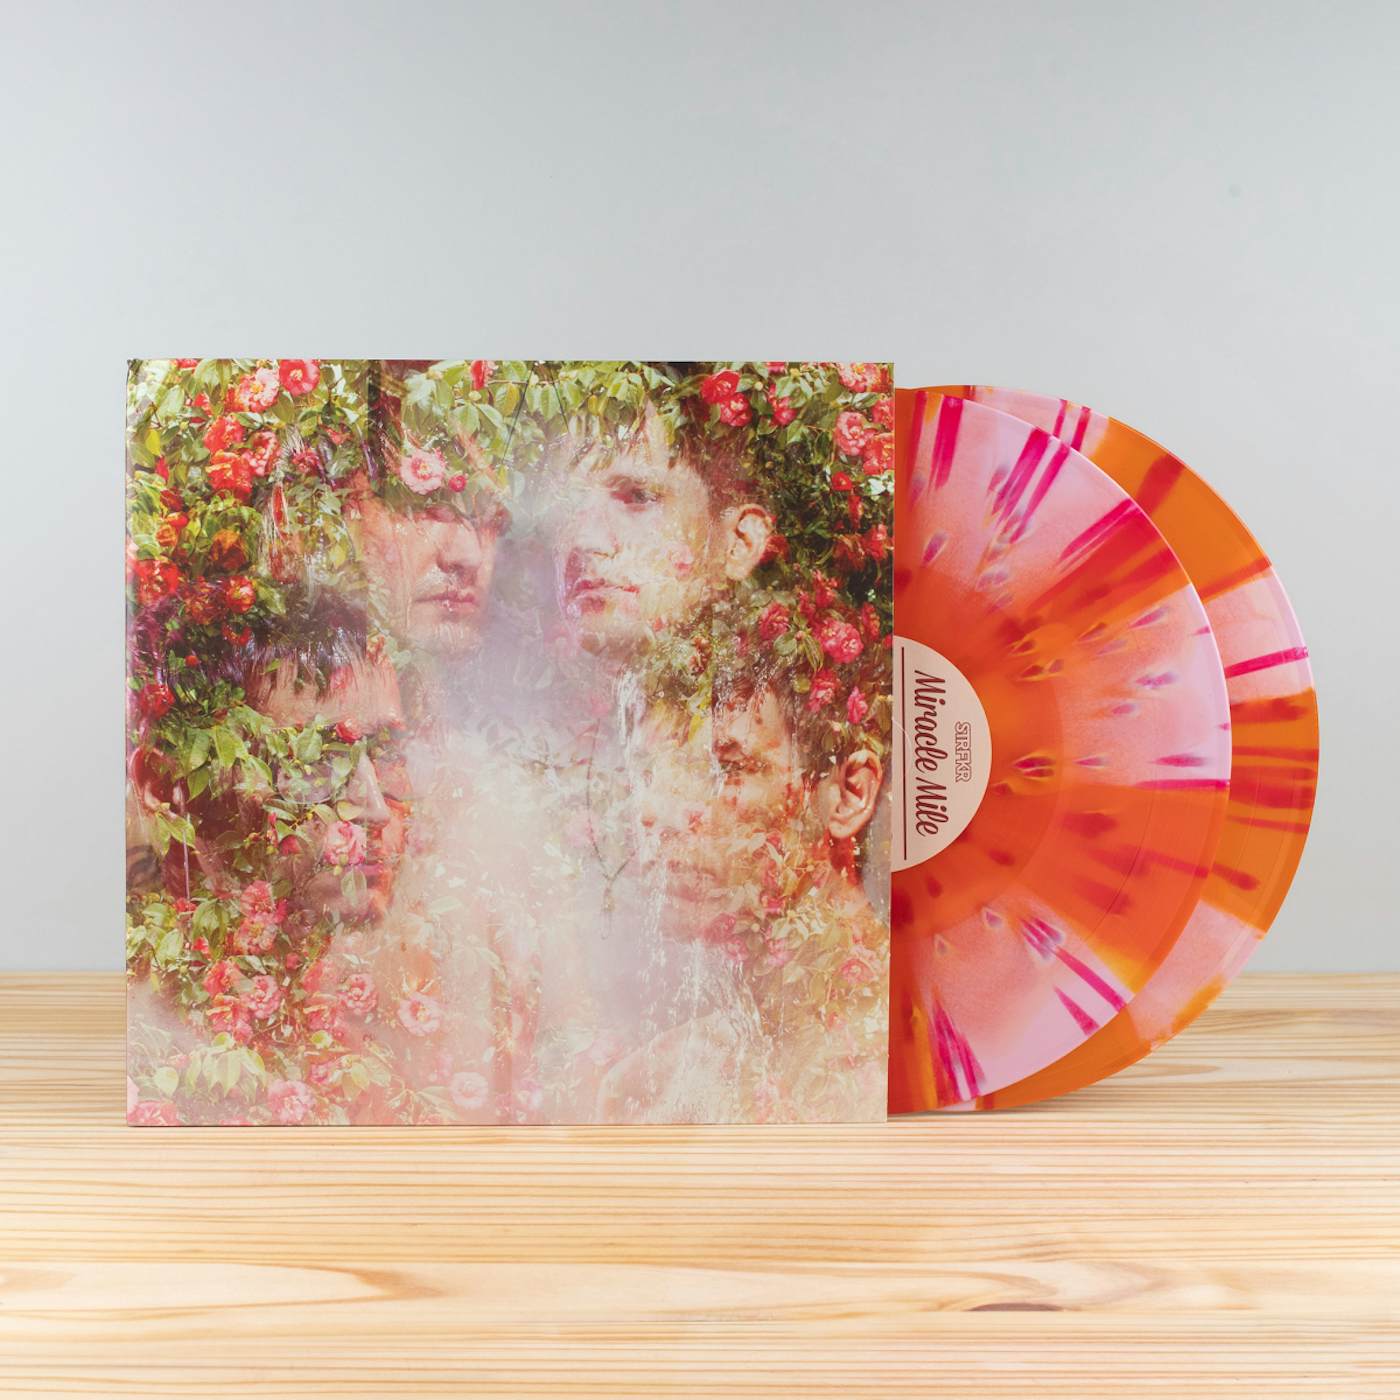 STRFKR Miracle Mile (10-Year Anniversary Edition)